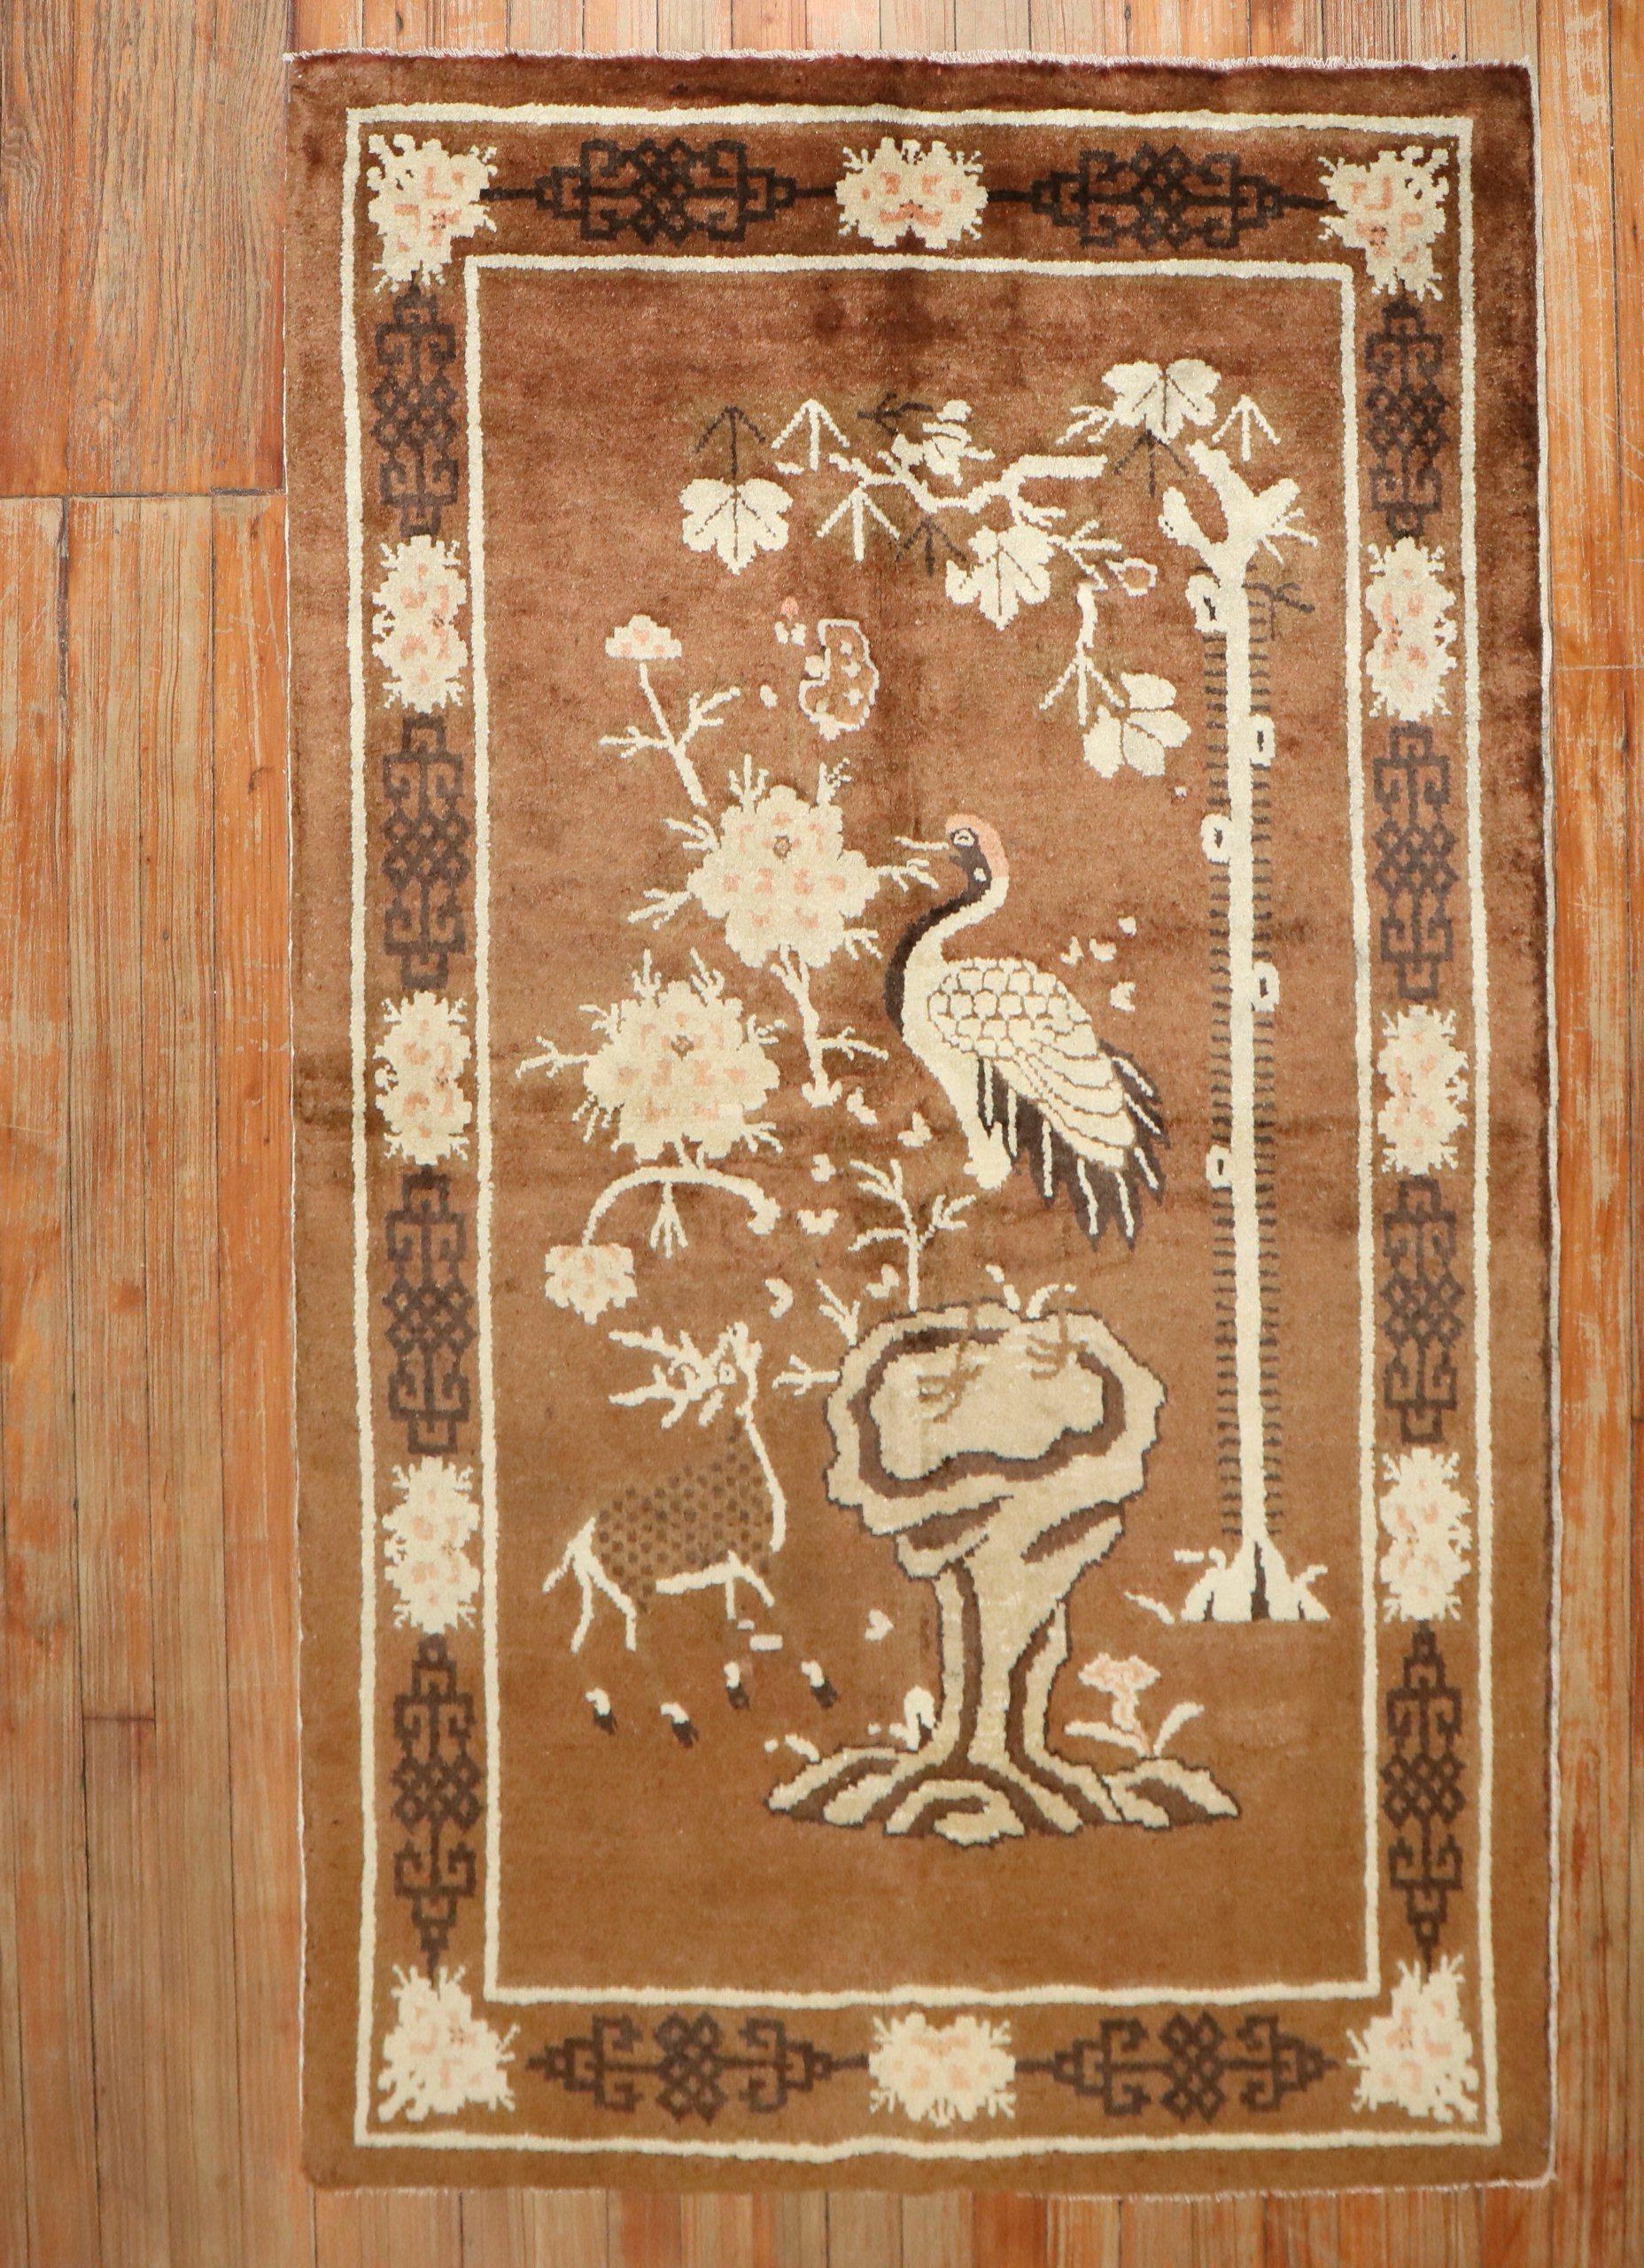 A 2nd quarter of the 20th-century Chinese Peking rug with a pictorial design in brown

Size: 3'3'' x 5'2''.

